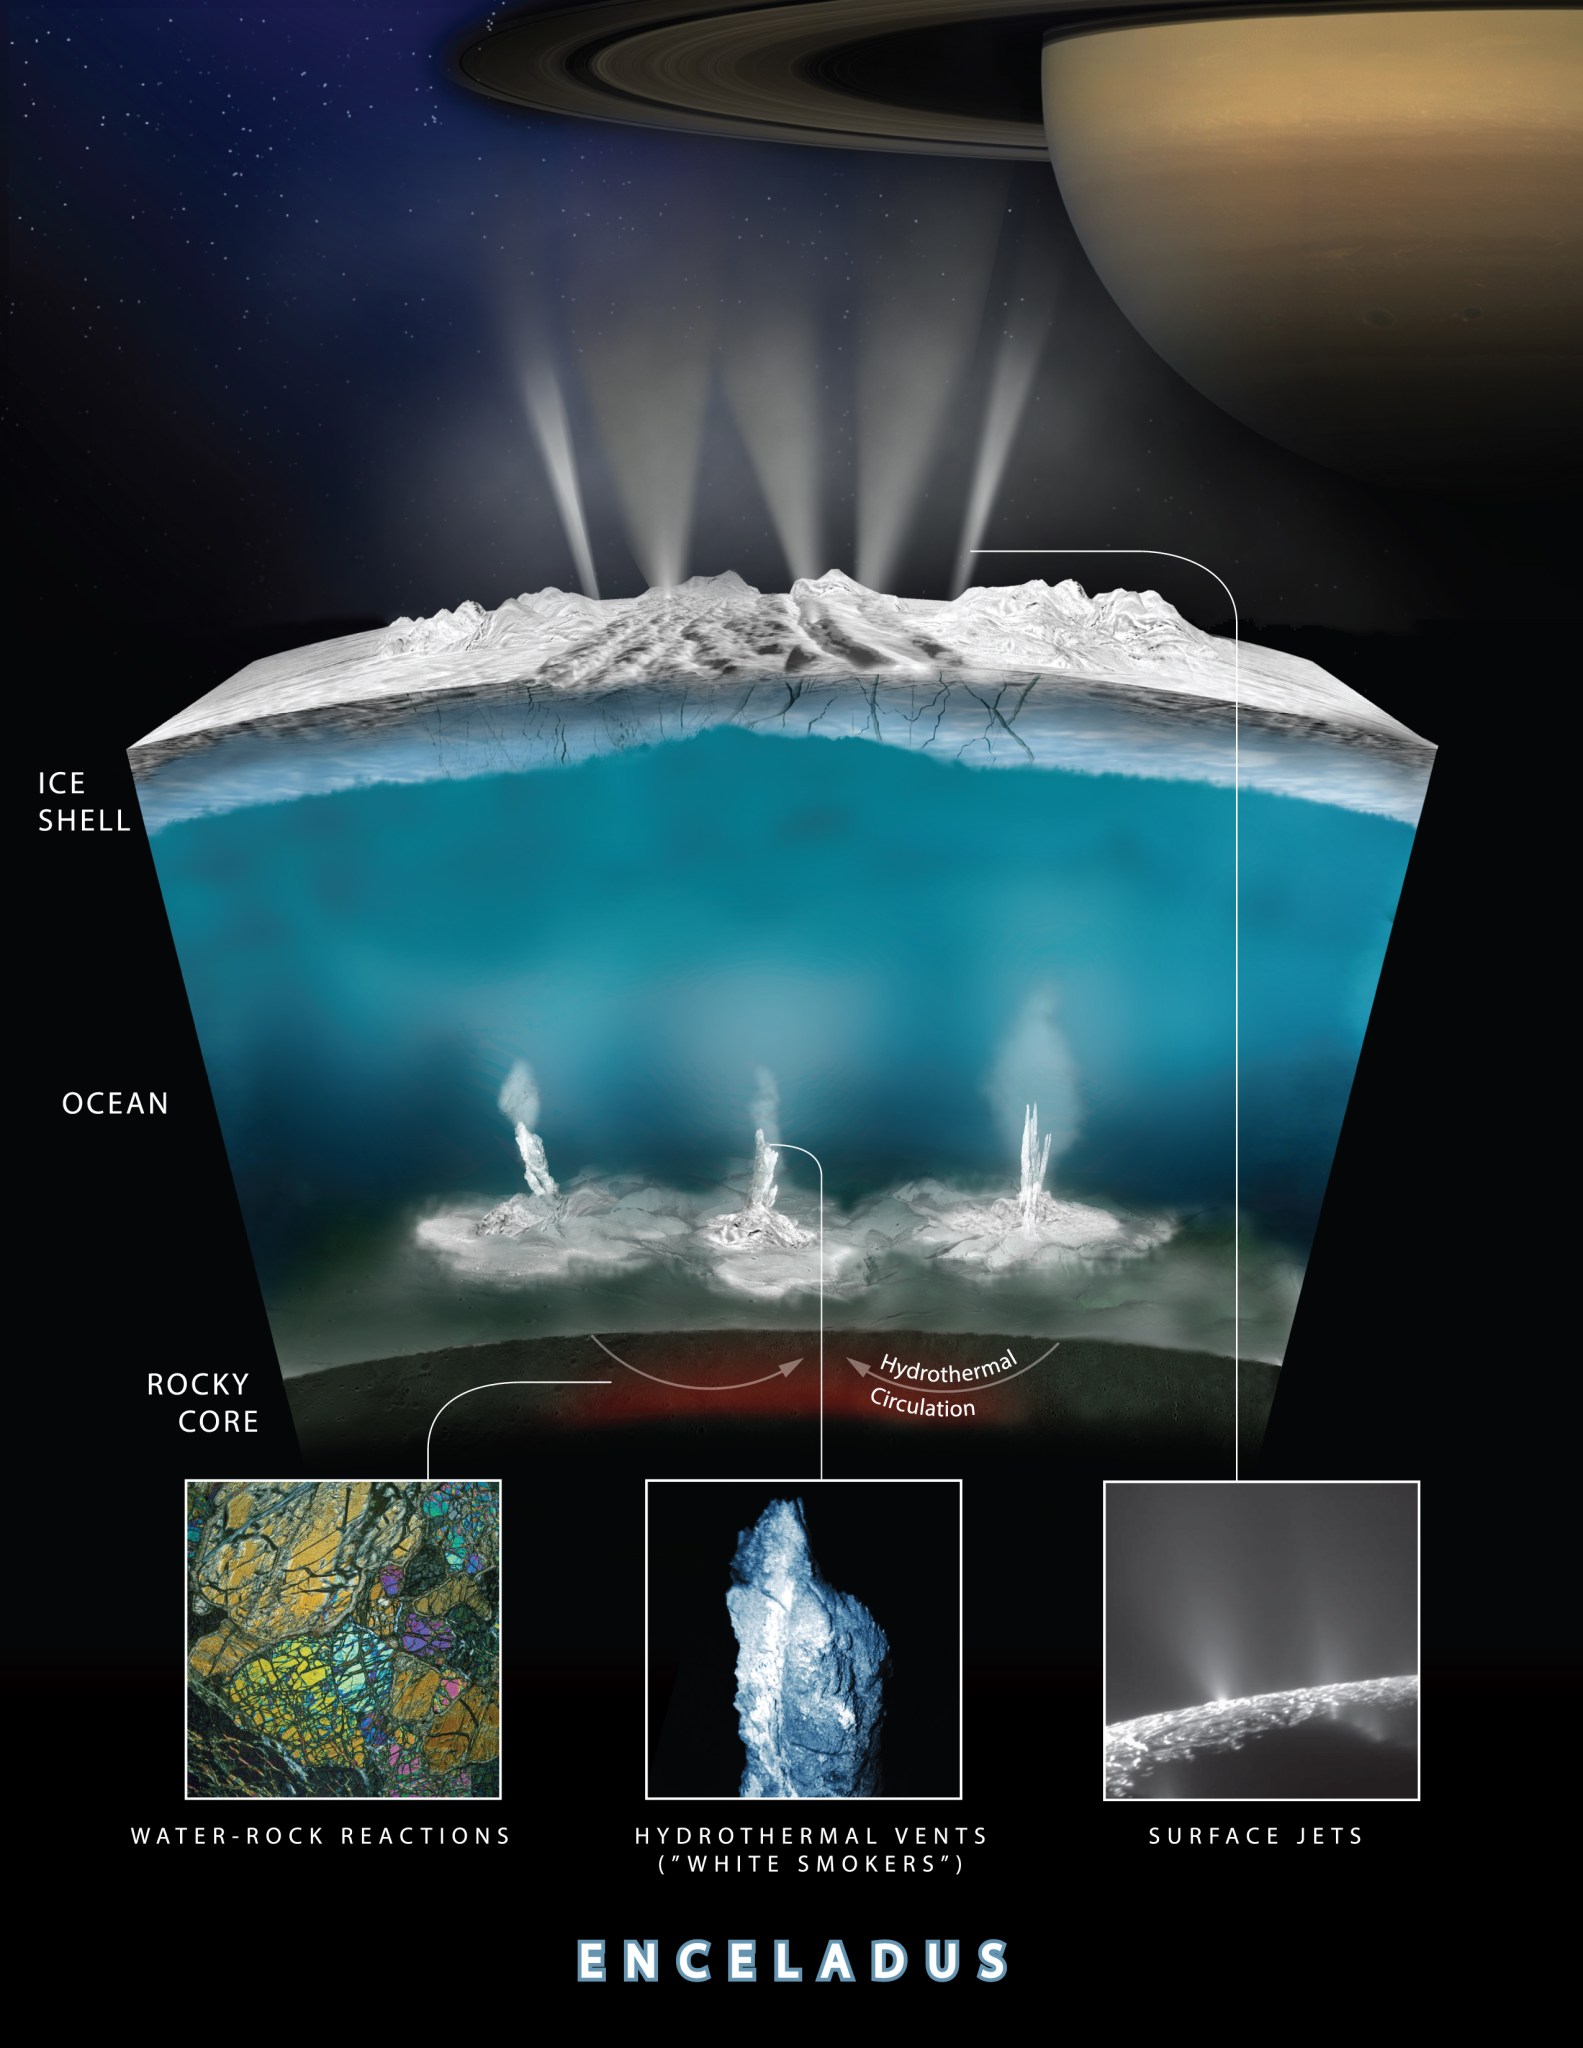 Graphic illustrates how Cassini scientists think water interacts with rock at the bottom of the ocean of Saturn's icy moon